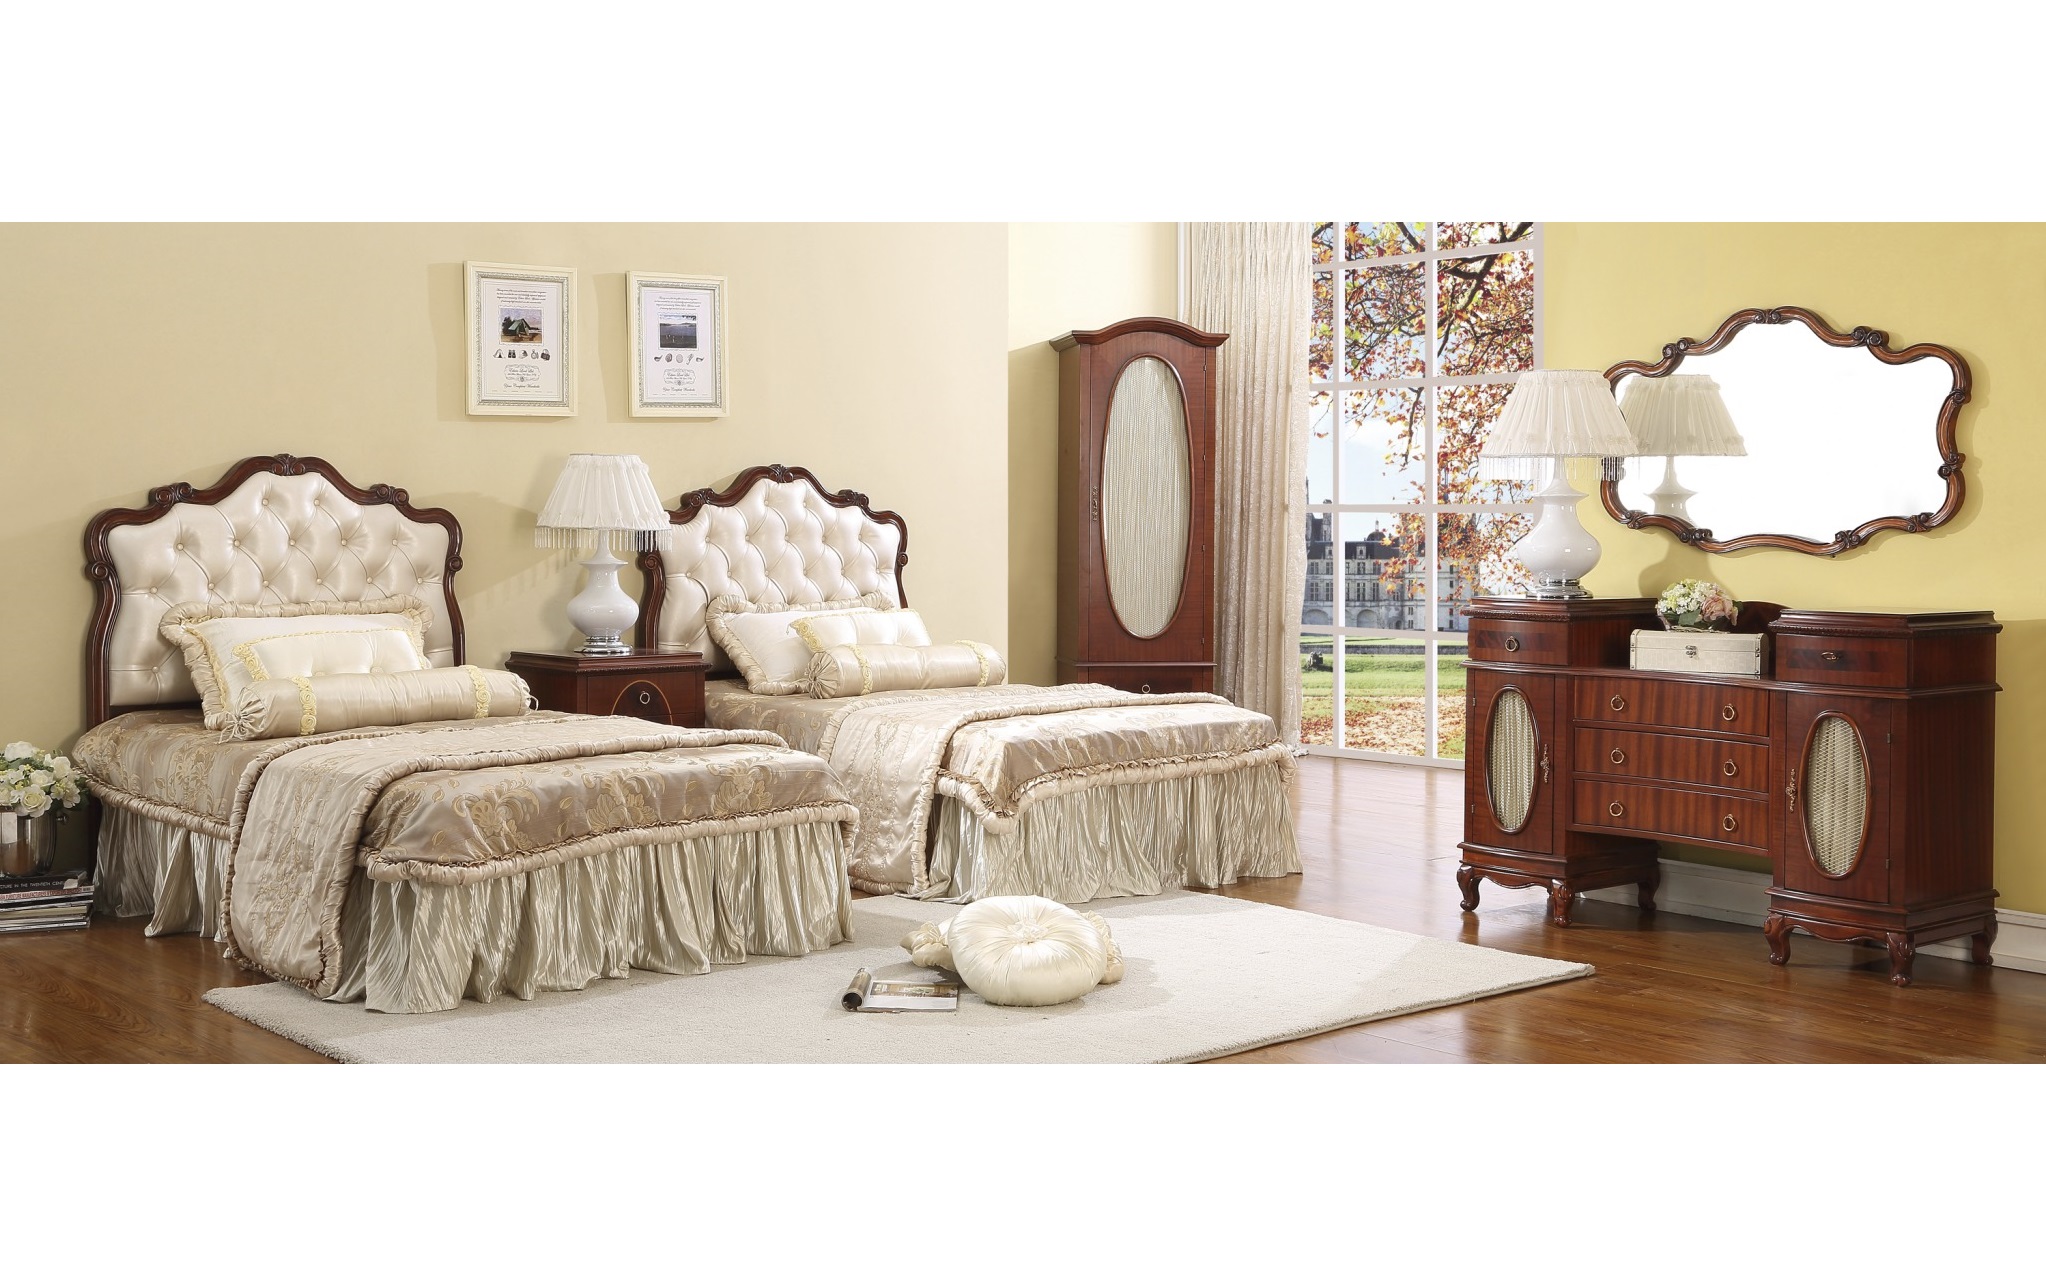 Ashley Bedroom Set, Complete Bedroom Sets For Sale Brooklyn, New York - Accentuations Brand